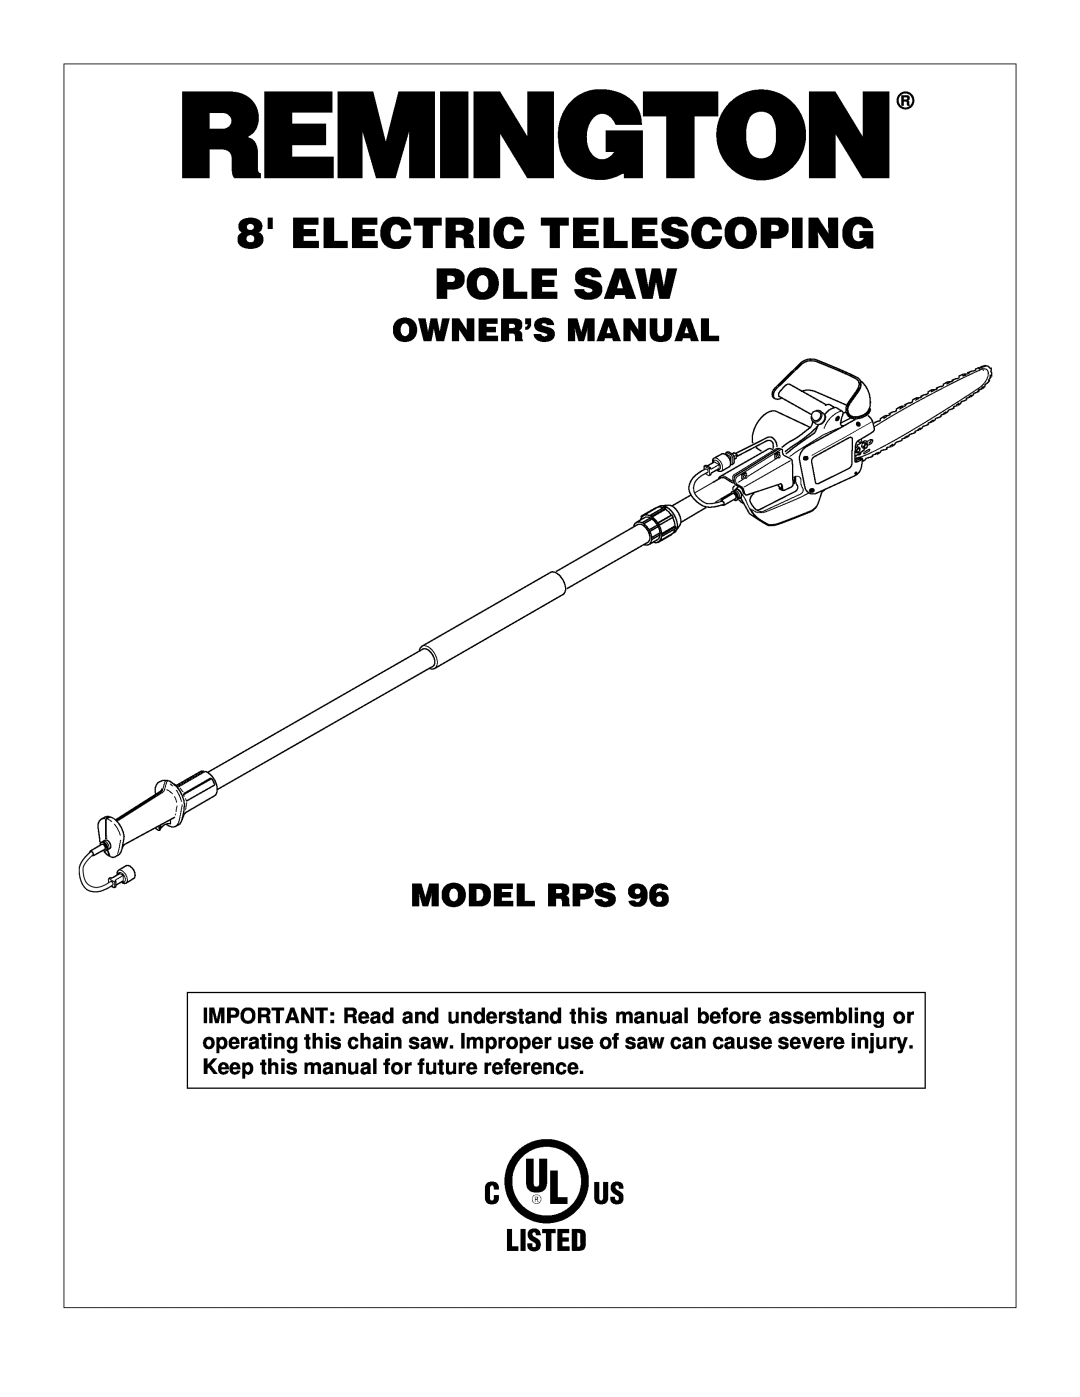 Remington RPS96 owner manual Electric Telescoping Pole Saw 